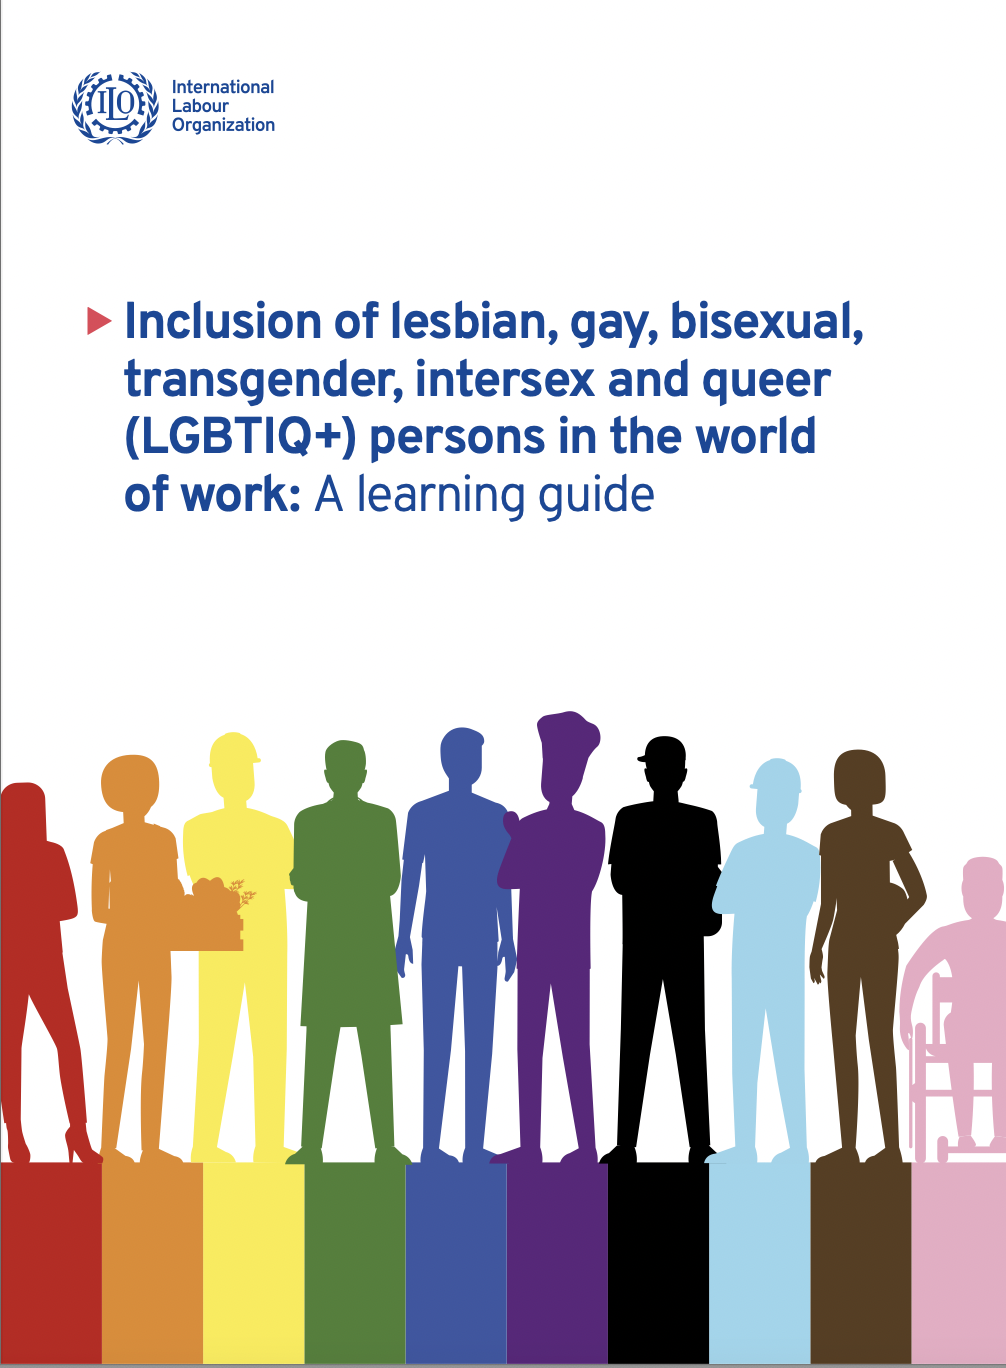 Inclusion of lesbian, gay, bisexual, transgender, intersex and queer (LGBTIQ+) persons in the world of work: A learning guide